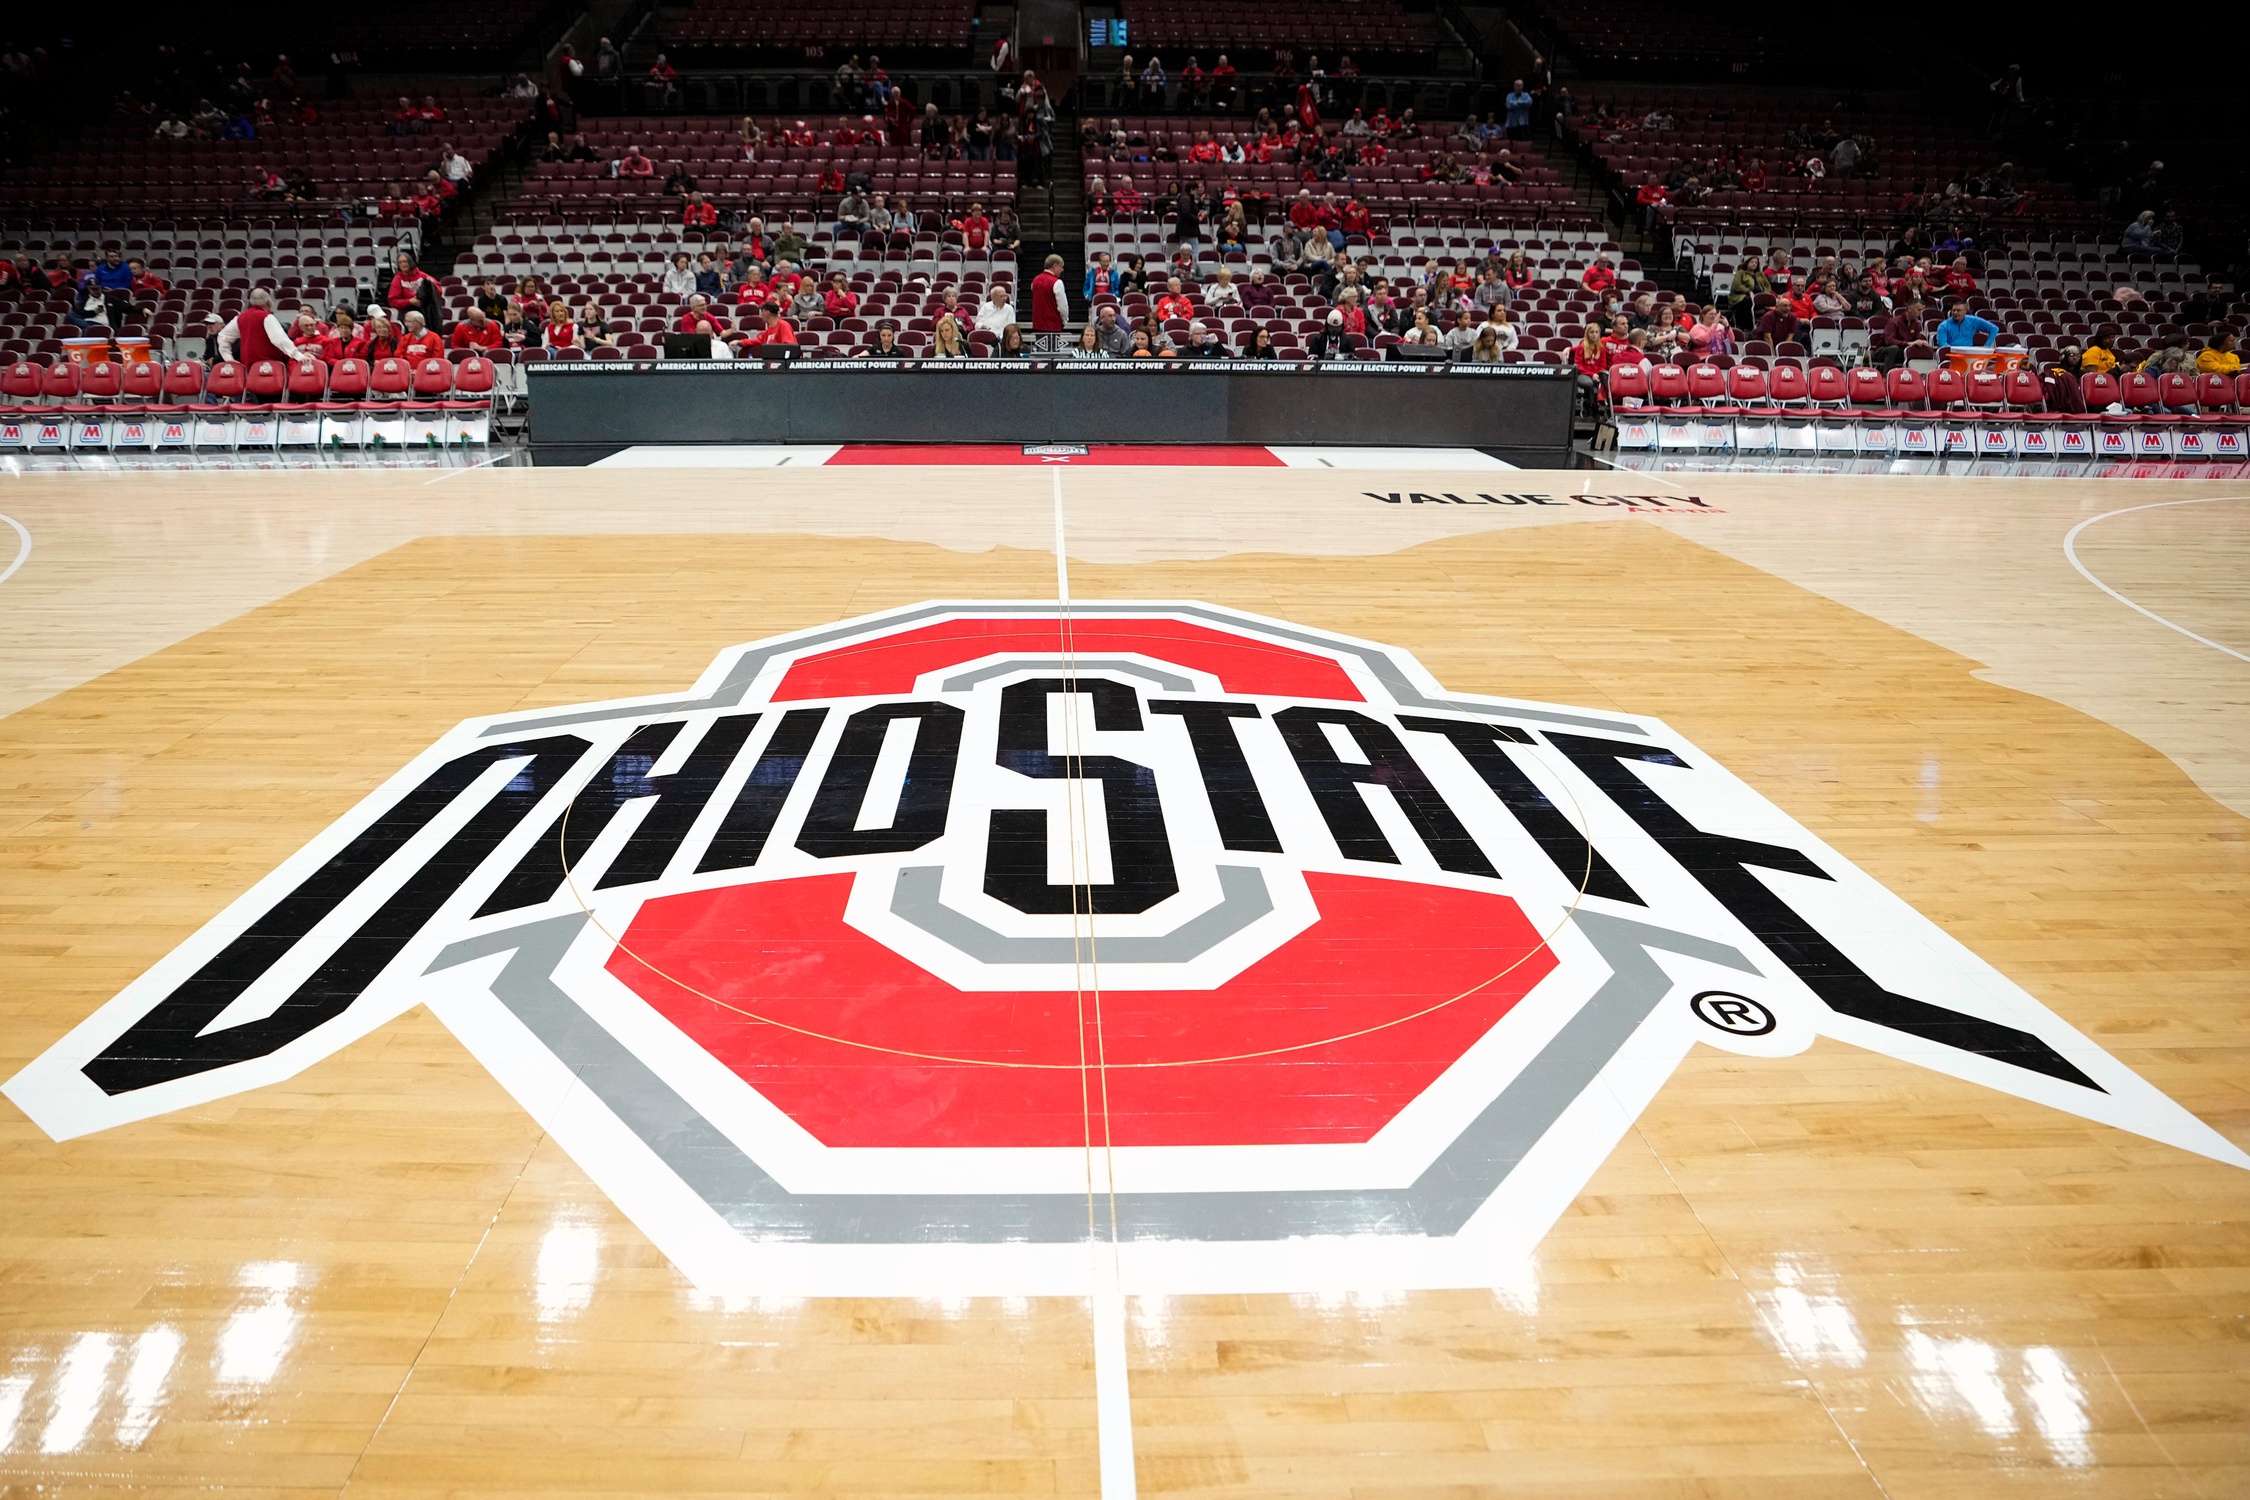 Ohio State has a promising roster and new head coach.